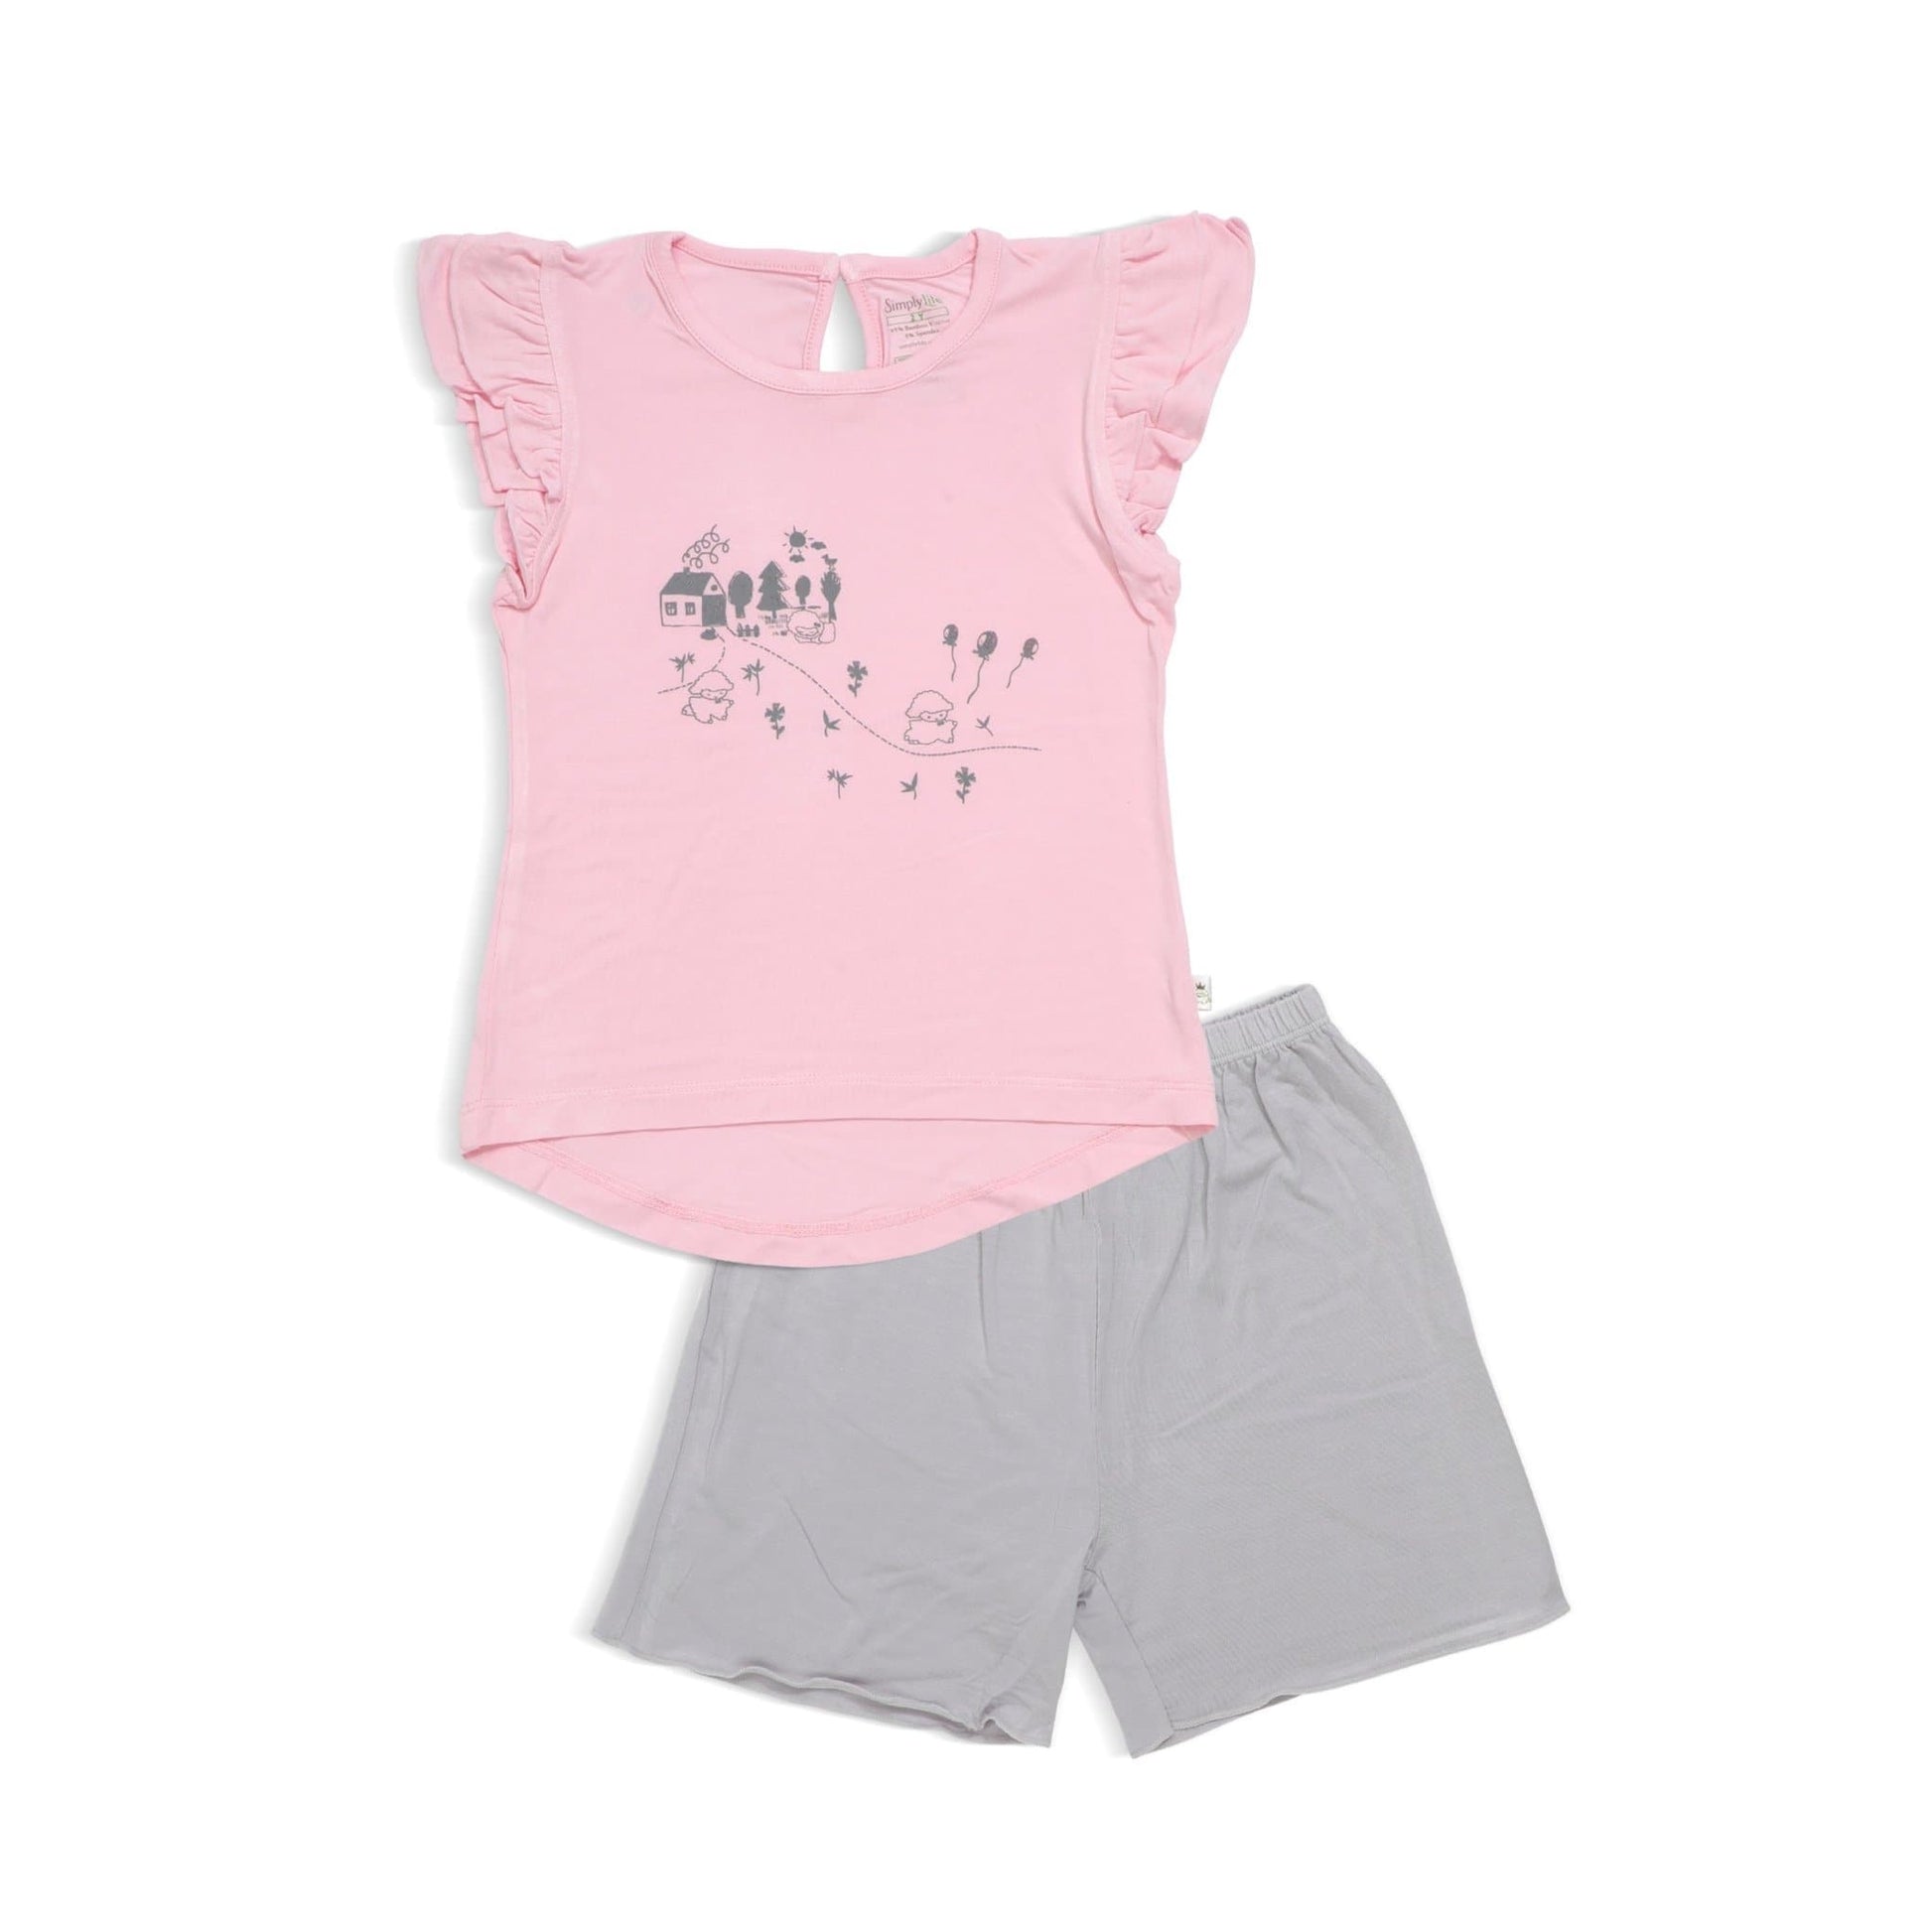 Adorable Lamb - Shorts & Tee with Cap-sleeves Set by simplylifebaby